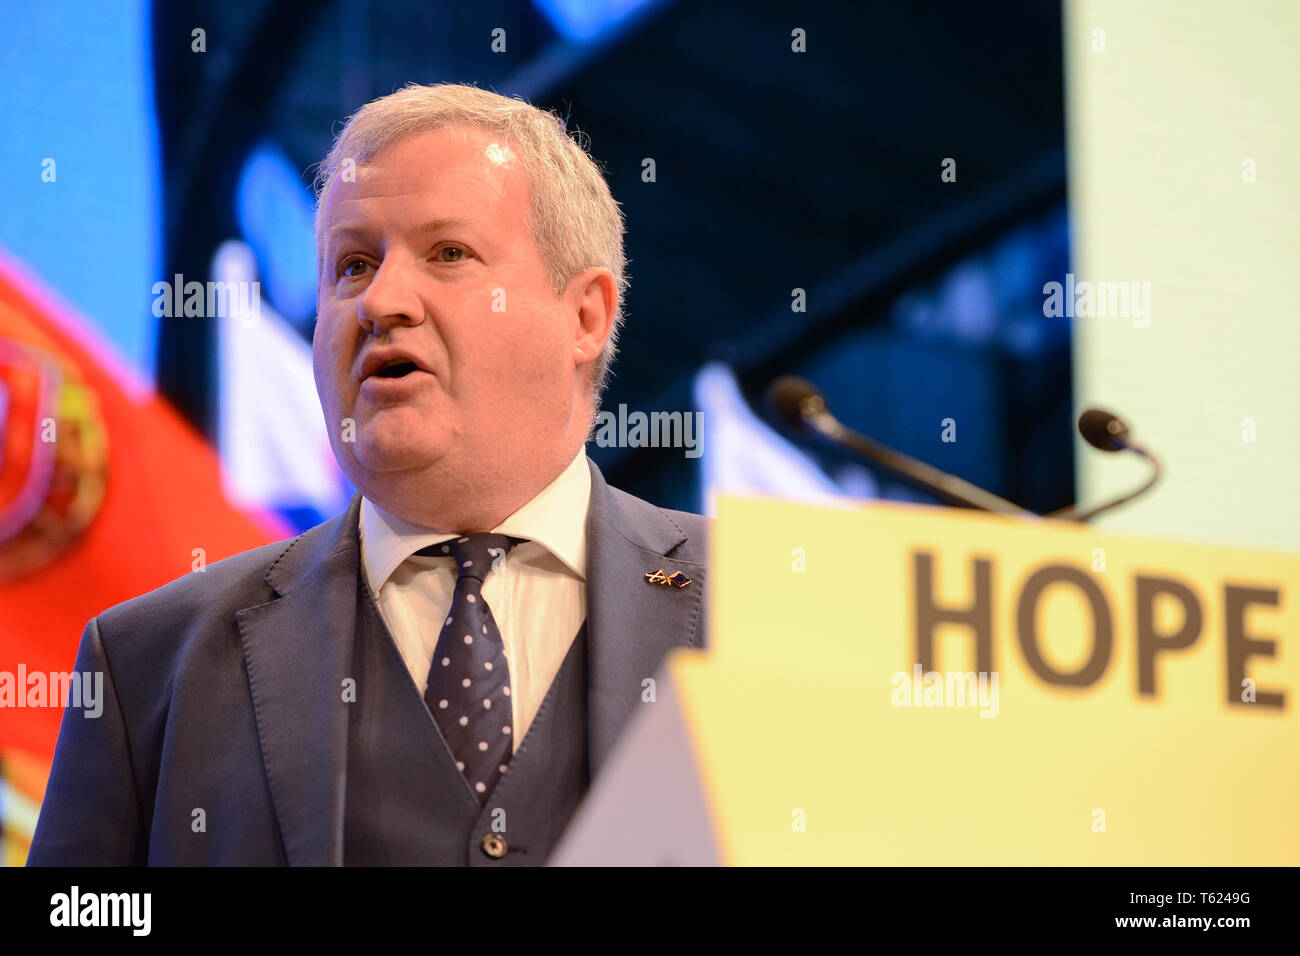 Edinburgh, Scotland, United Kingdom, 27, April, 2019. SNP Westminster leader Ian Blackford addresses the Scottish National Party's Spring Conference in the Edinburgh International Conference Centre. © Ken Jack / Alamy Live News Stock Photo